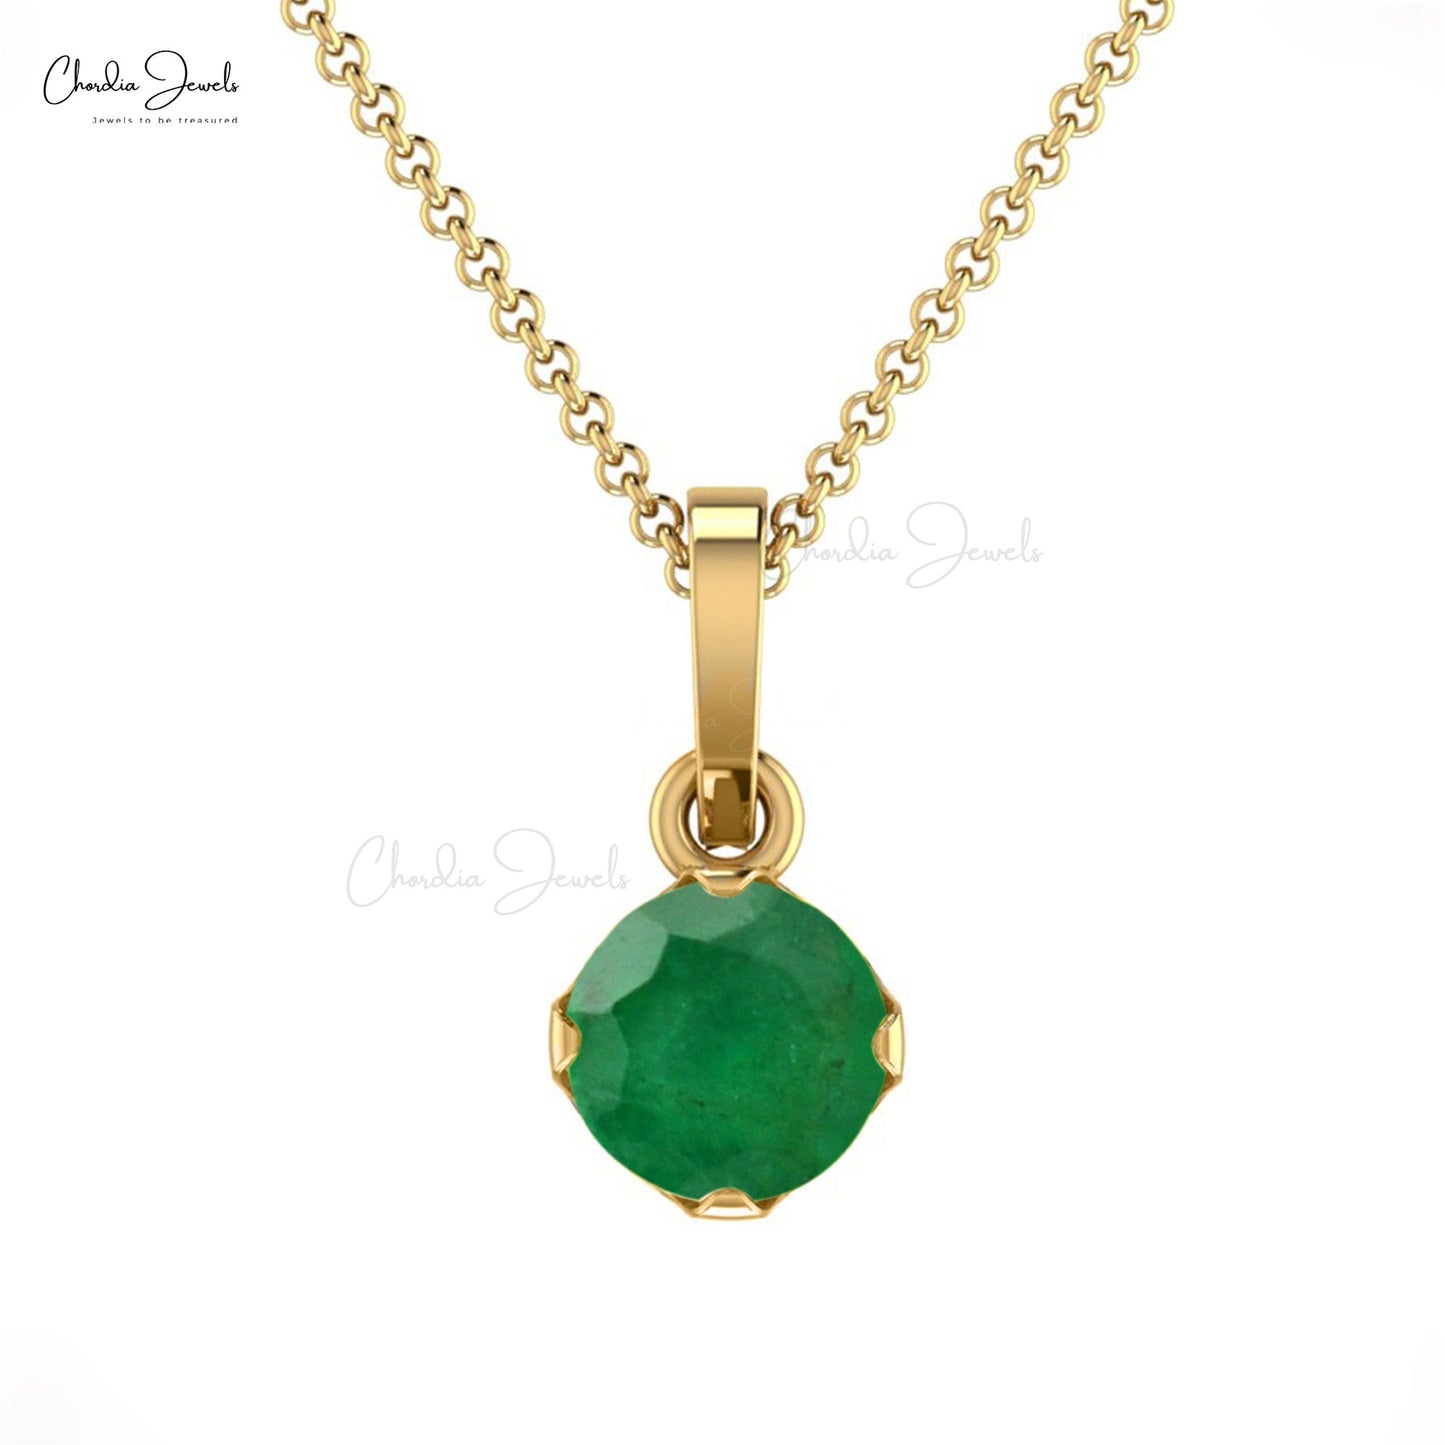 Solid 14k Gold Emerald Solitaire Pendant Dainty May Birthstone Jewelry For Anniversary Gift